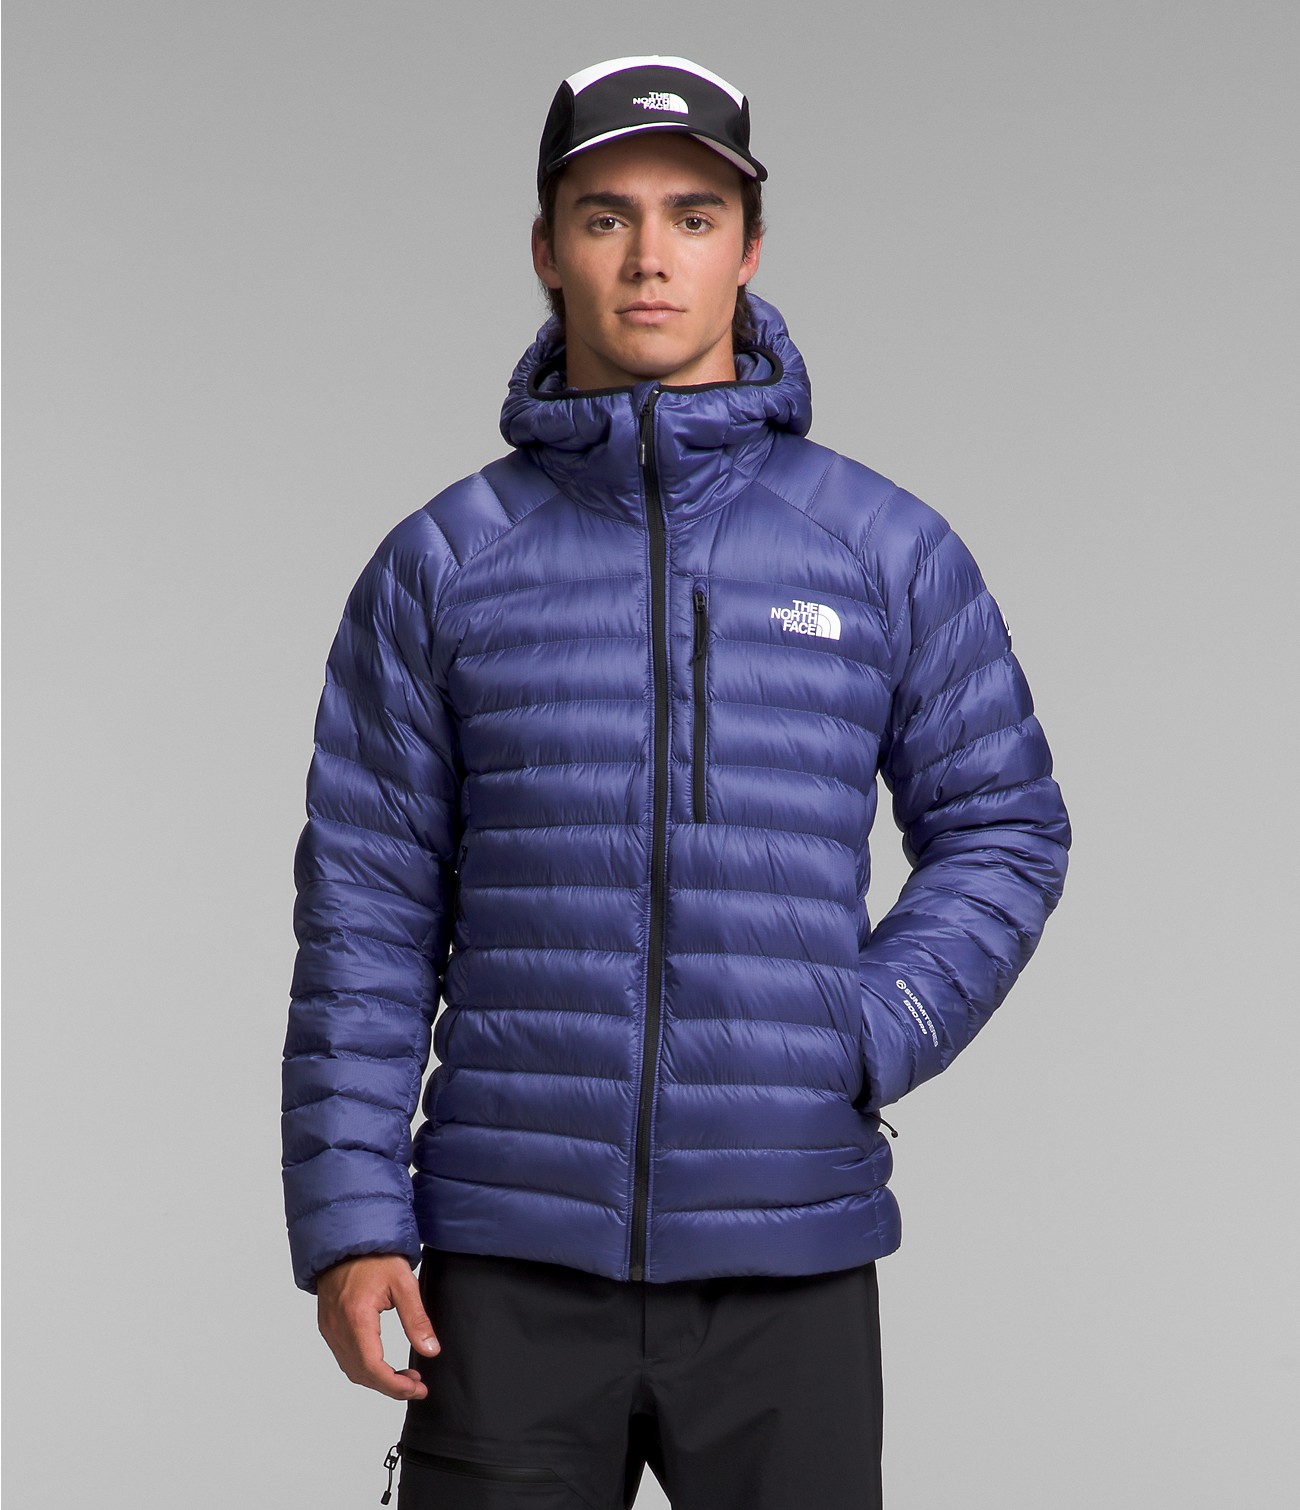 Unlock Wilderness' choice in the Outdoor Research Vs North Face comparison, the Summit Series Breithorn Hoodie by The North Face